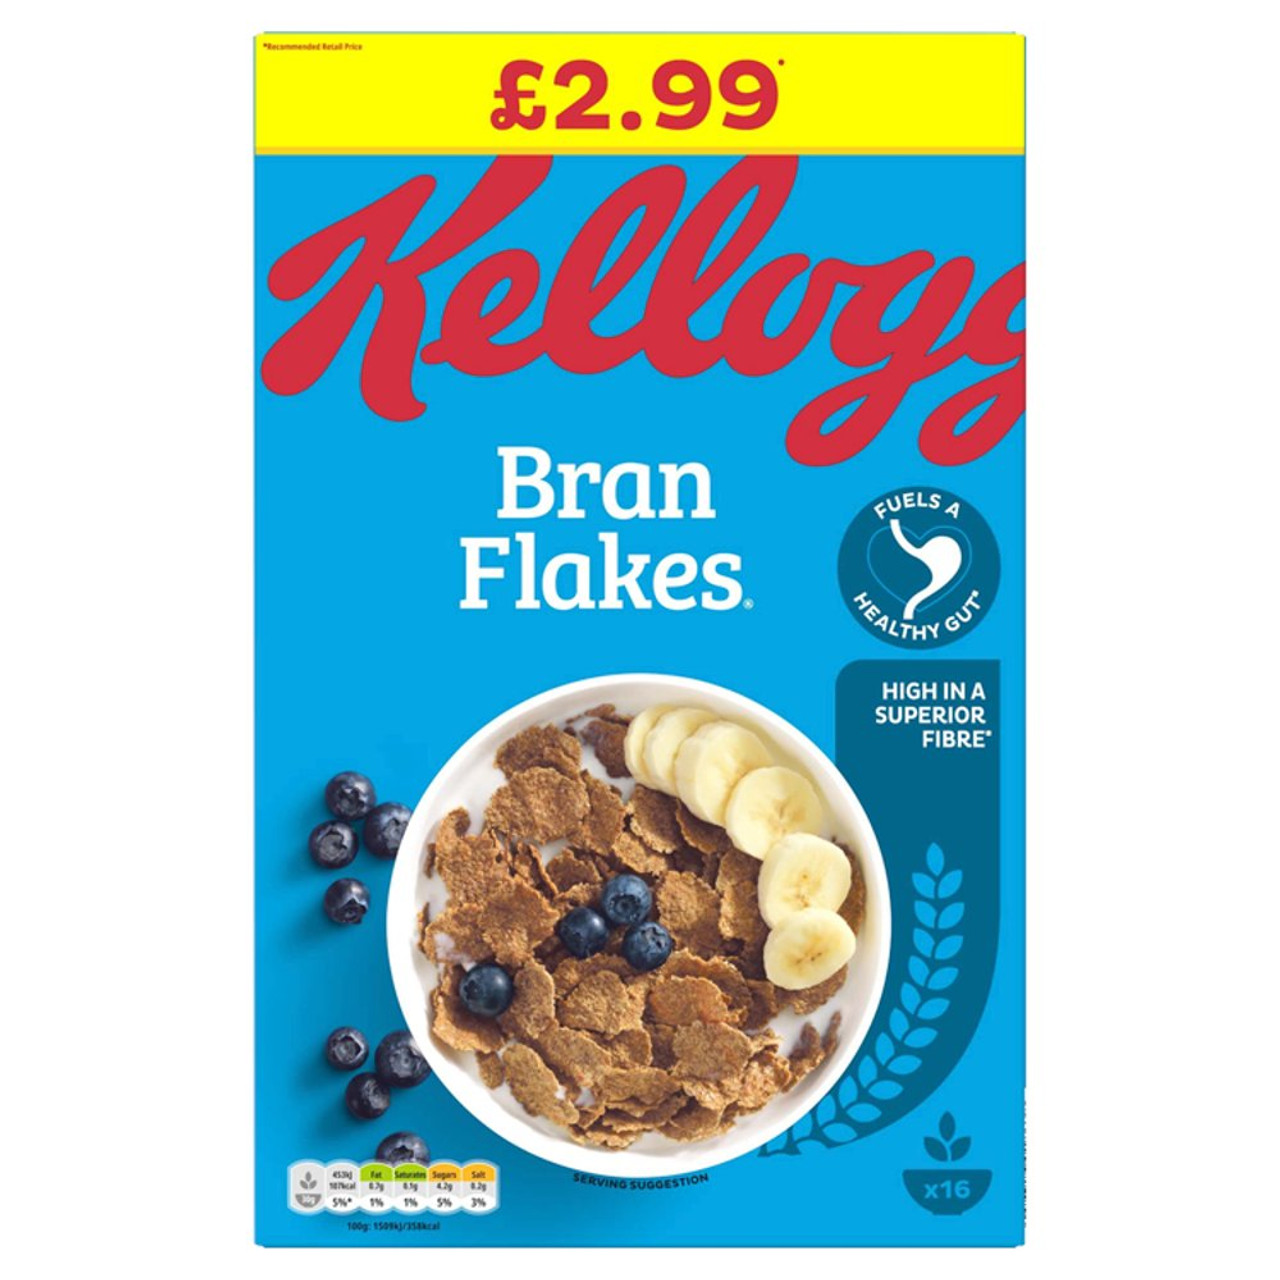 Kellogg's Corn Flakes Cereal PM £2.99 500g - We Get Any Stock